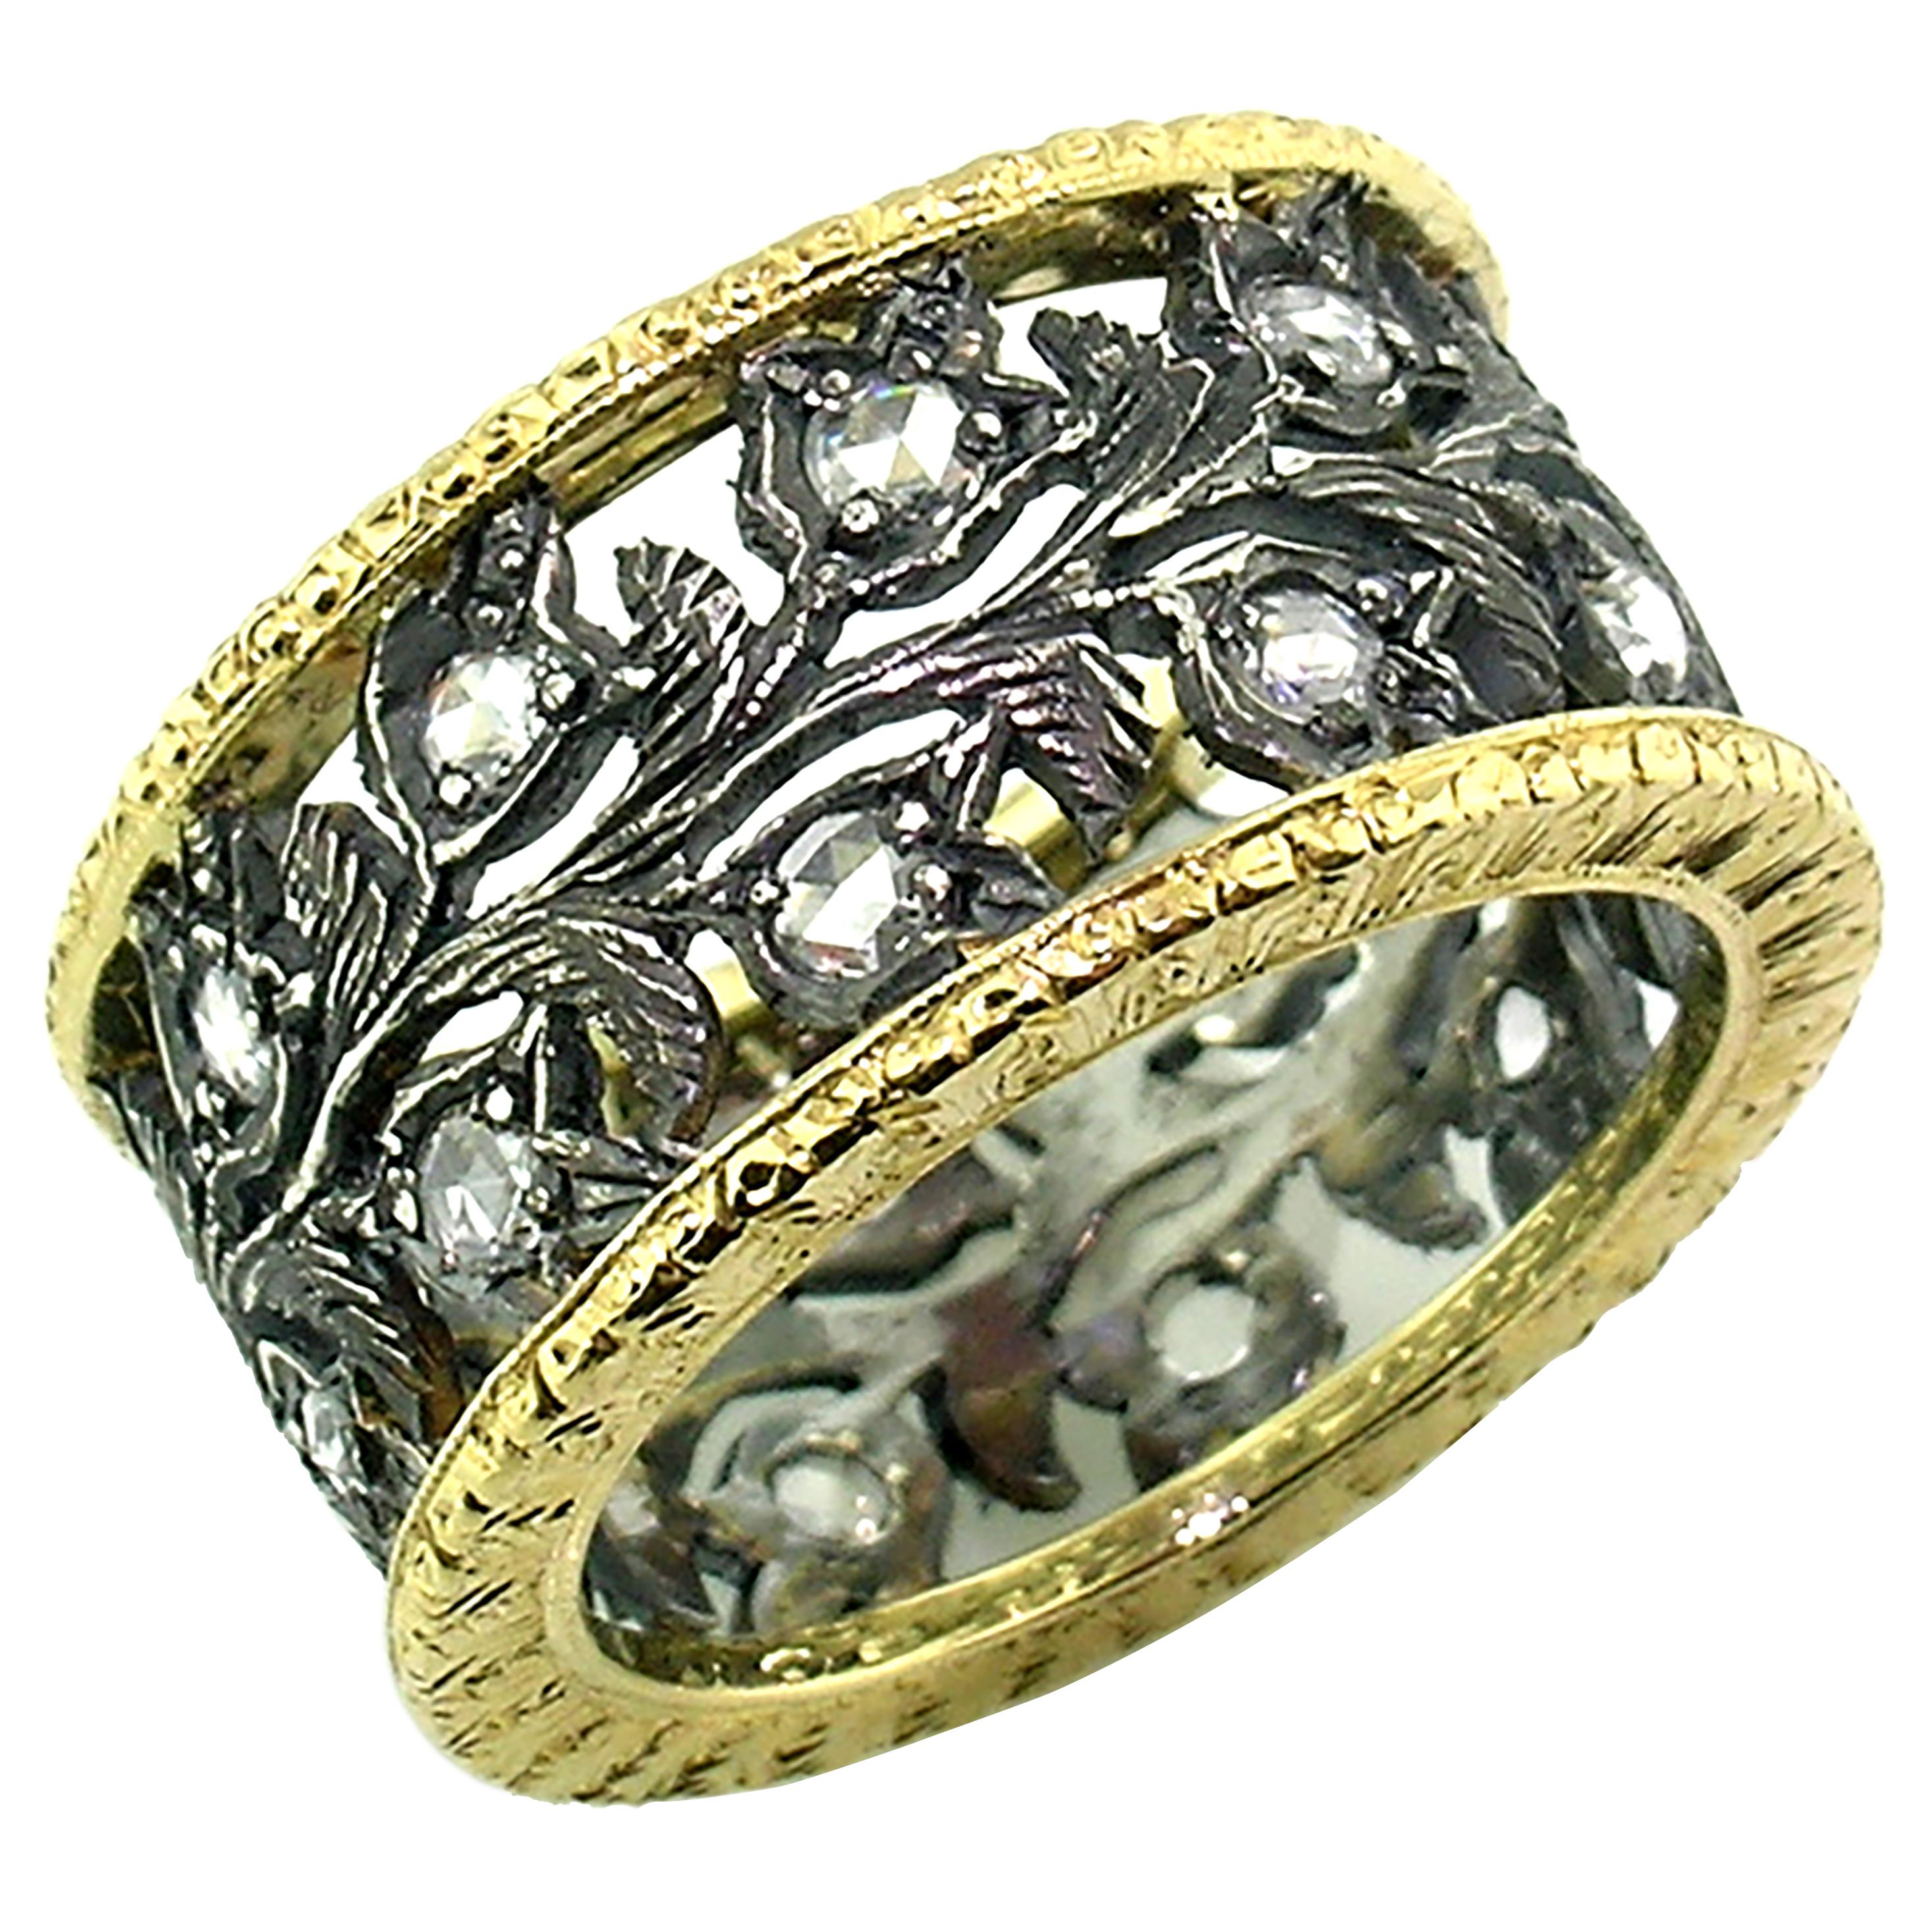 18kt Gold, Blackened Sterling, and Diamond Eternity Band Handmade in Italy